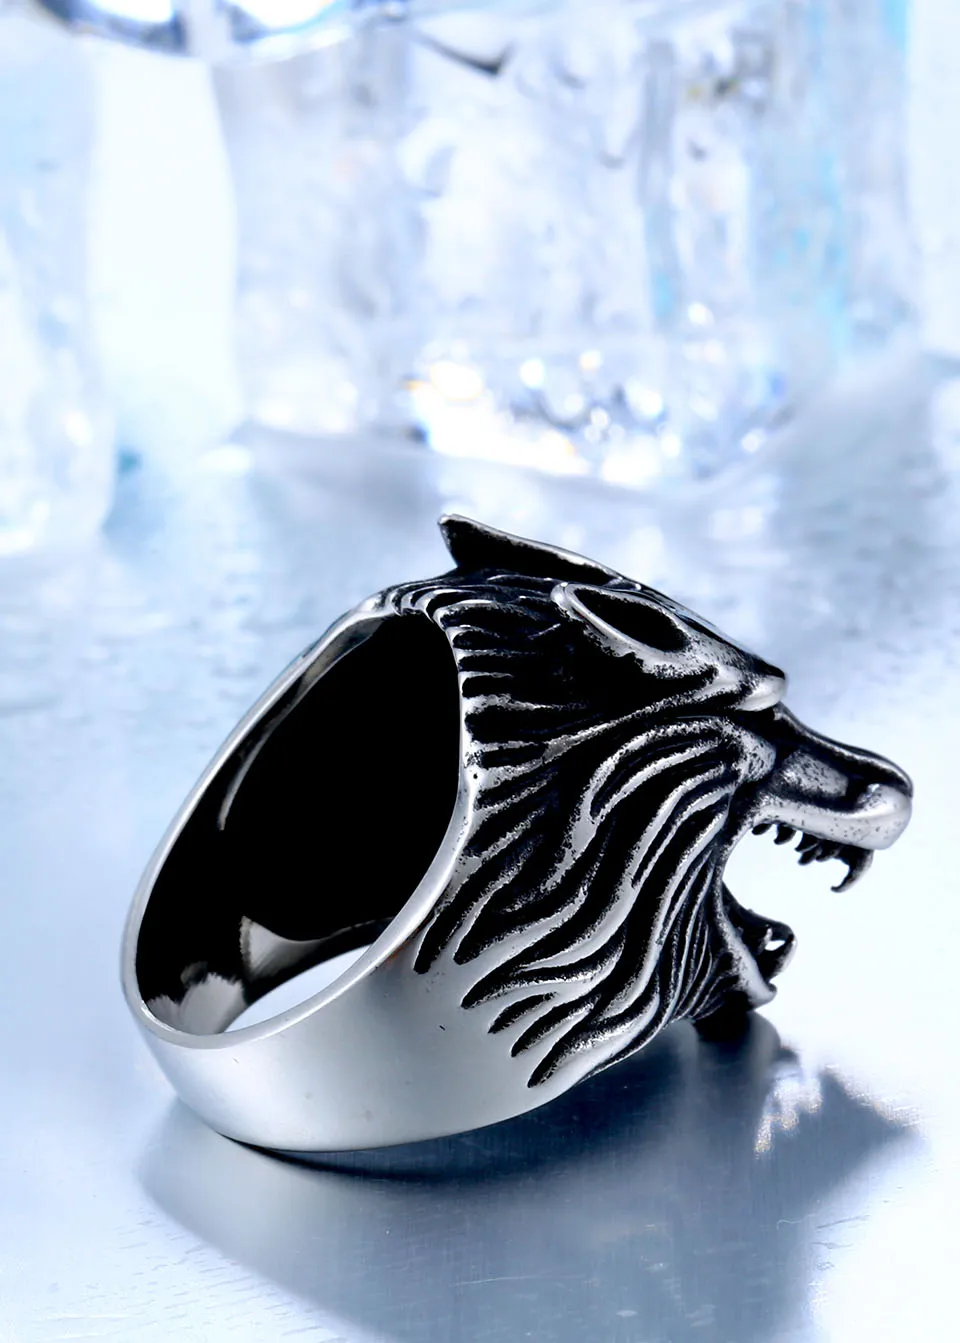 BEIER Dropshipping Cool Wolf Stainless Steel Man Punk Biker Ring BR8-075 US Size